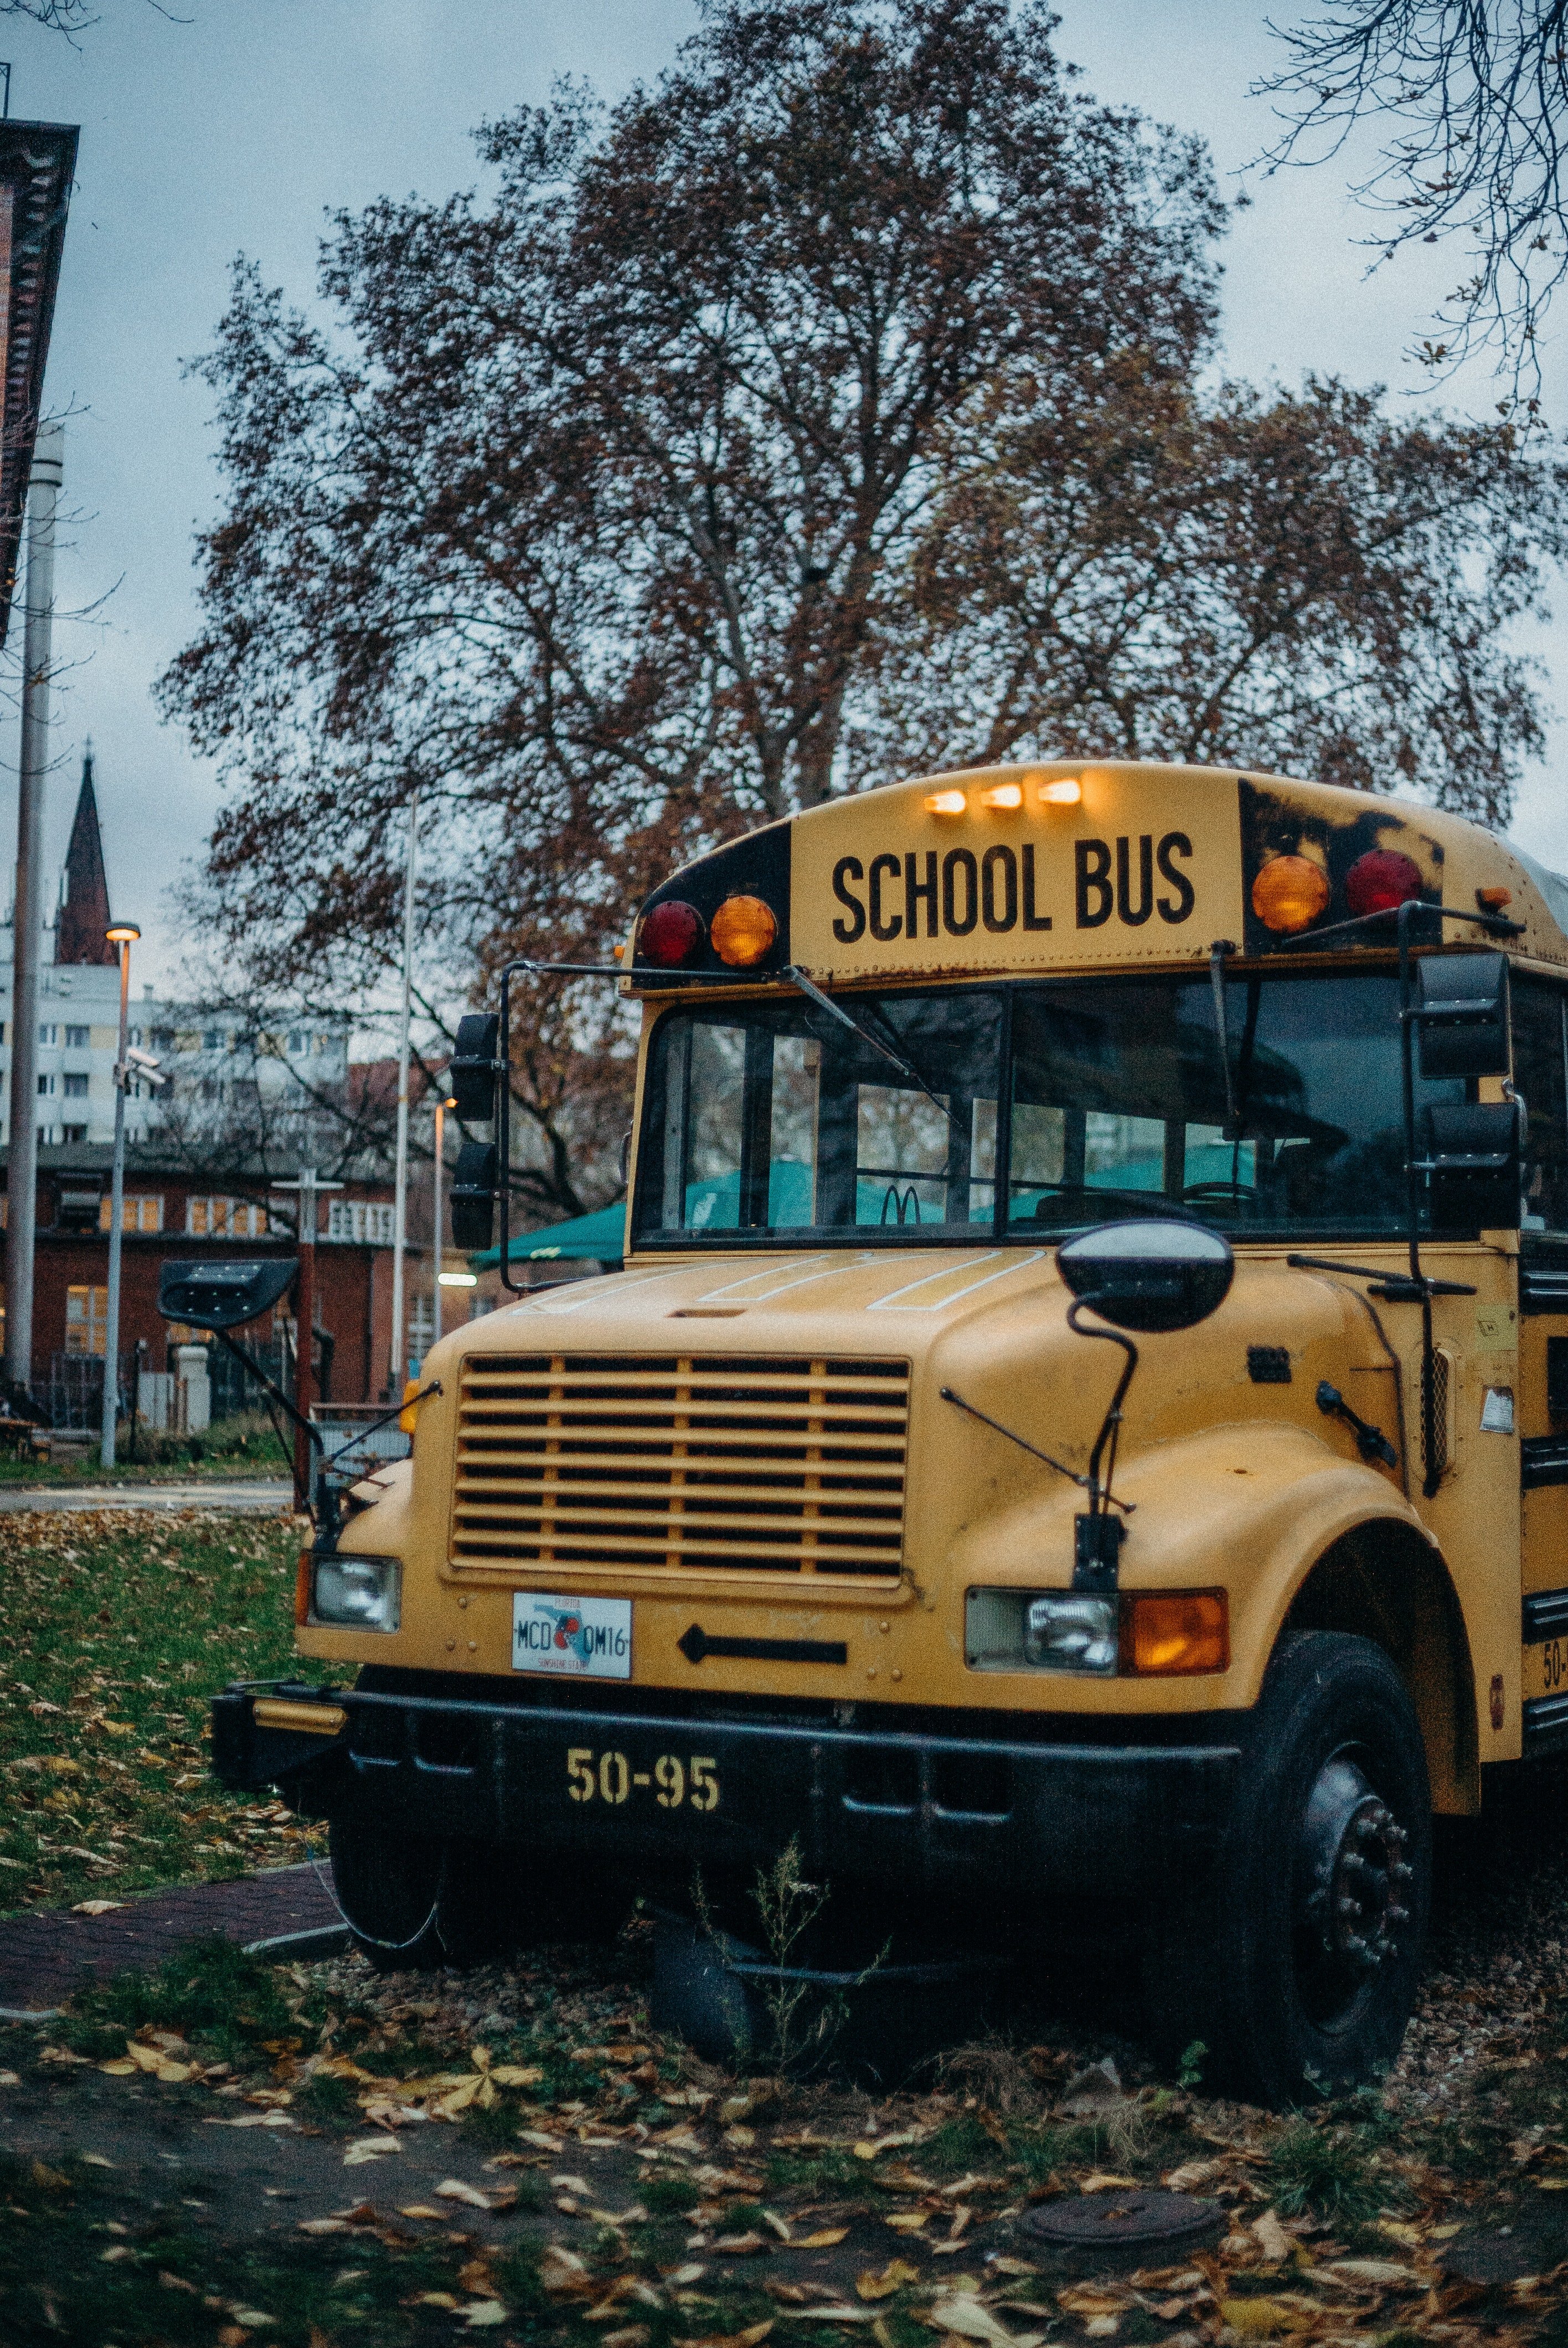 Scott loved his job as a bus driver. | Source: Pexels